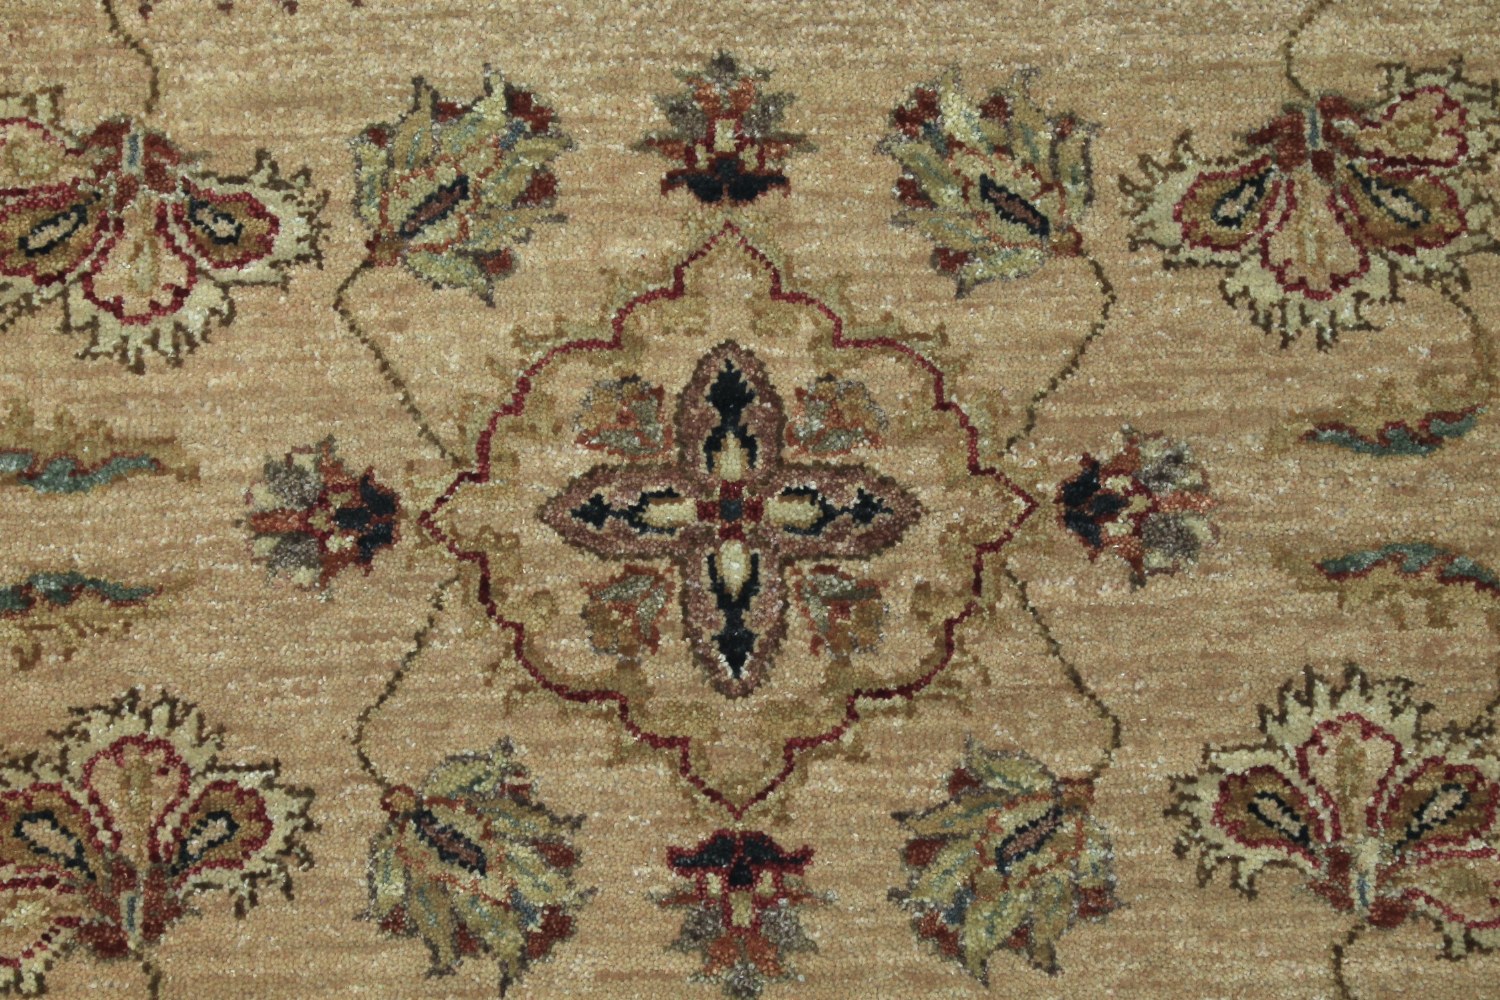 4x6 Traditional Hand Knotted Wool Area Rug - MR12284